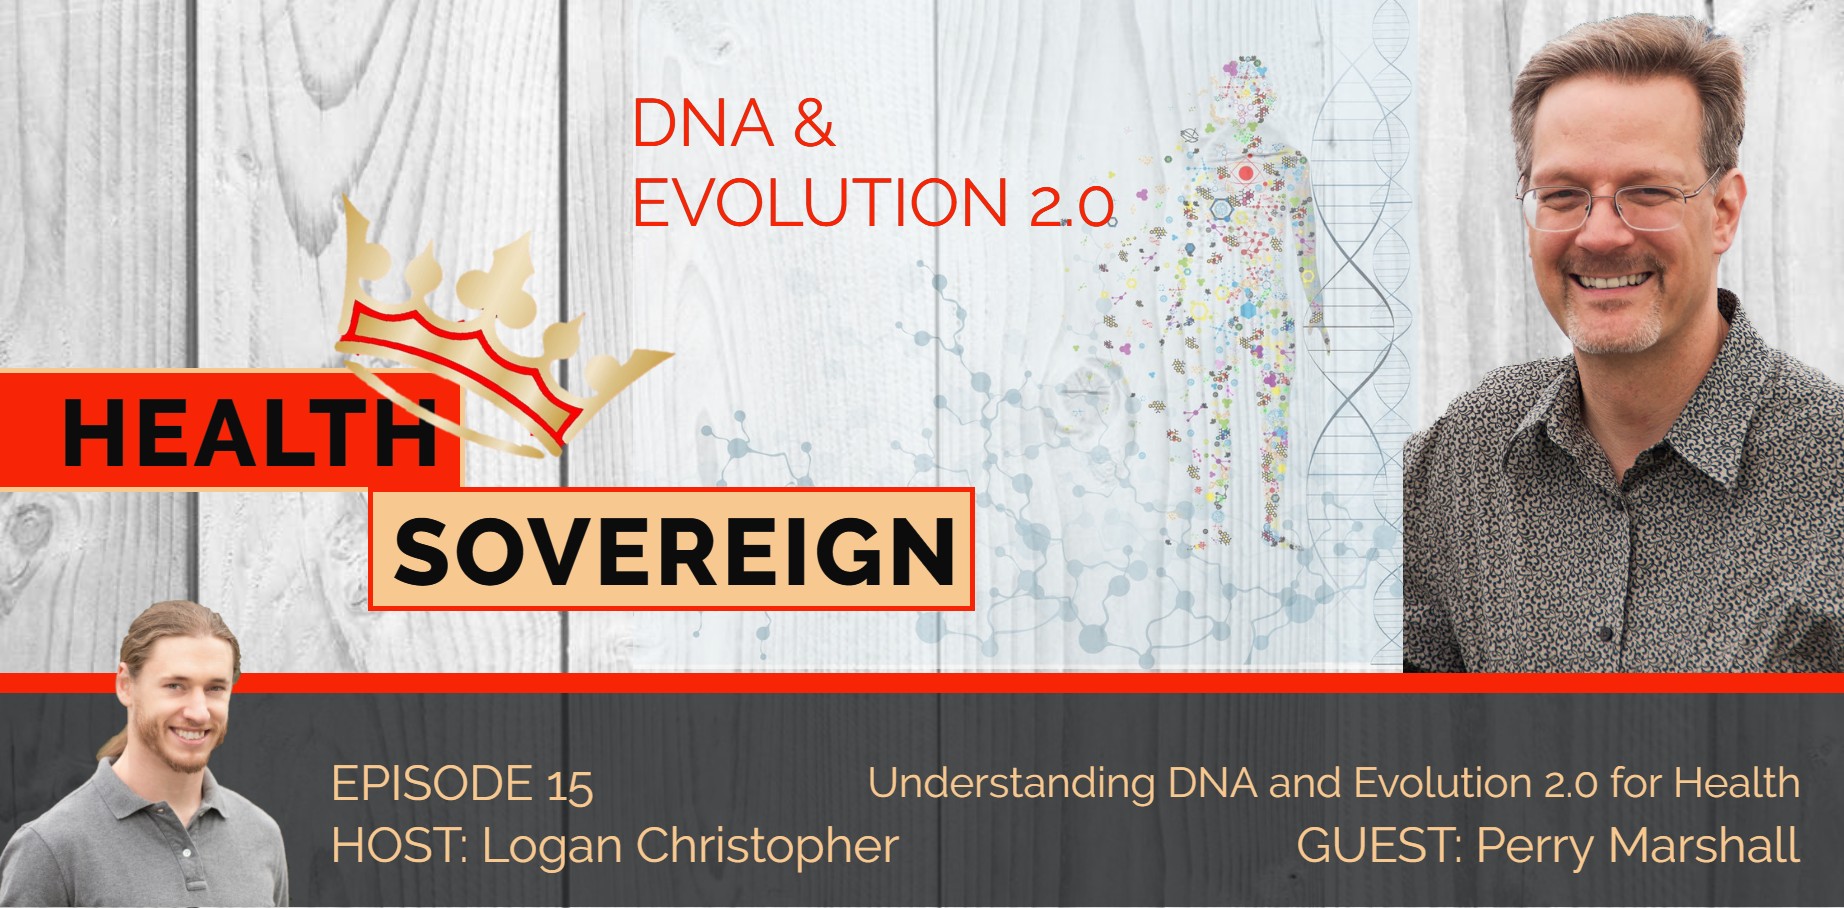 Understanding DNA and Evolution 2.0 for Health with Perry Marshall